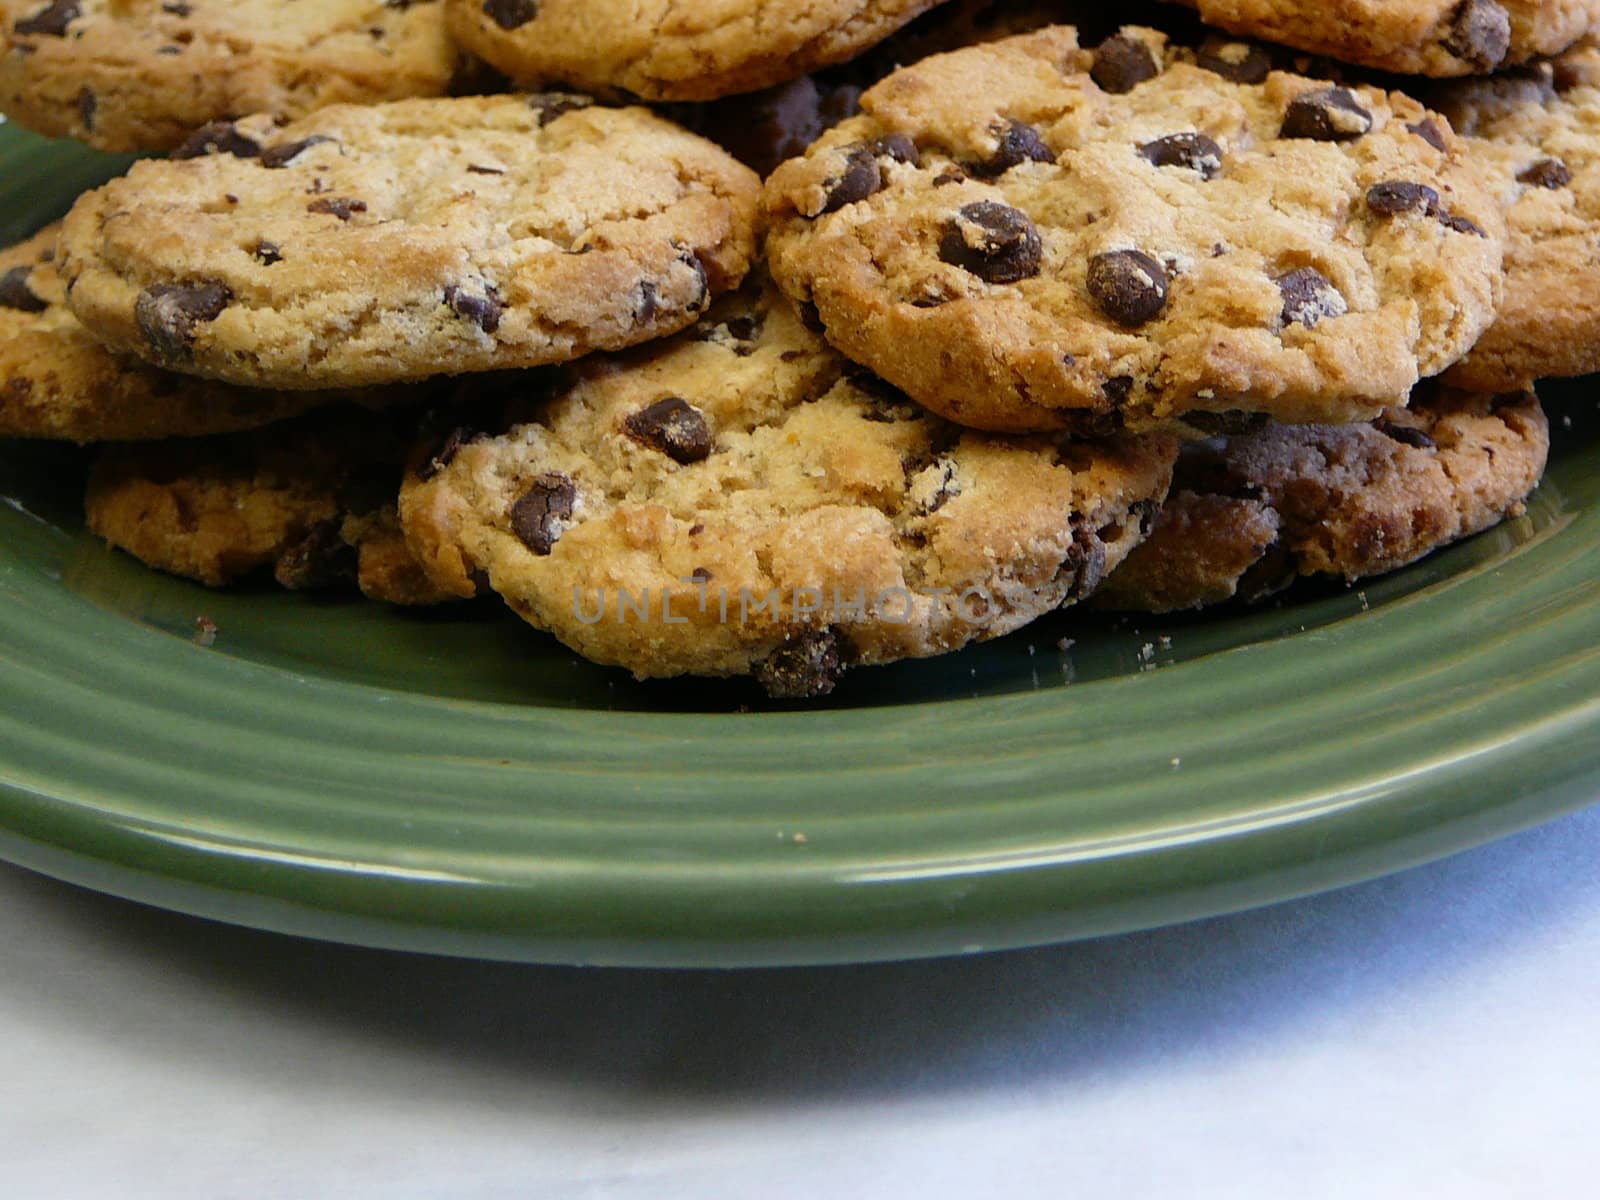 Plate of Chocolate chip cookies.